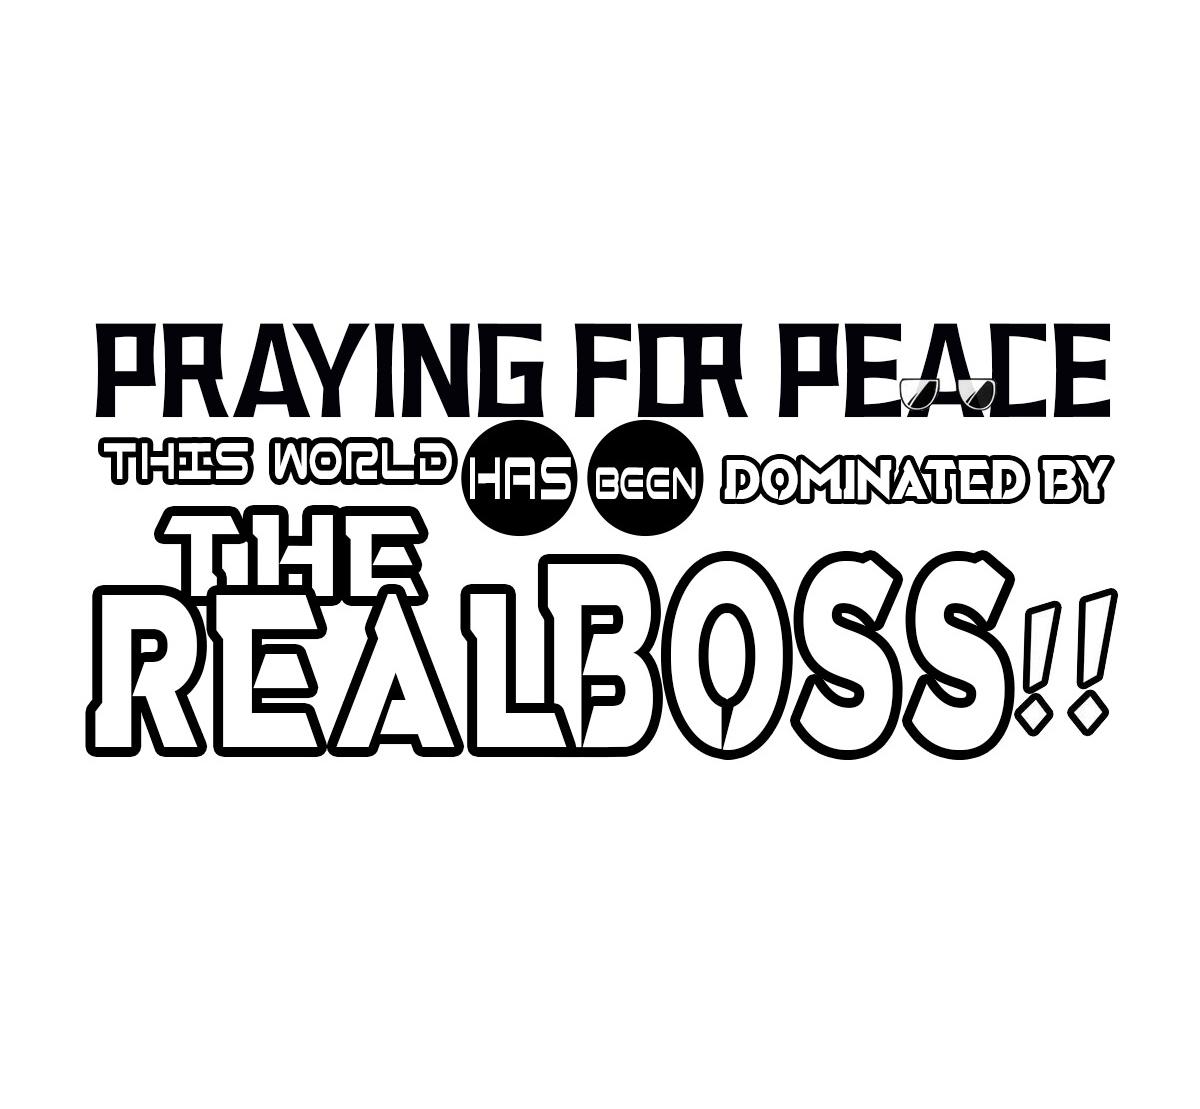 Praying For Peace: This World Has Been Dominated By The Real Boss!! - Page 1